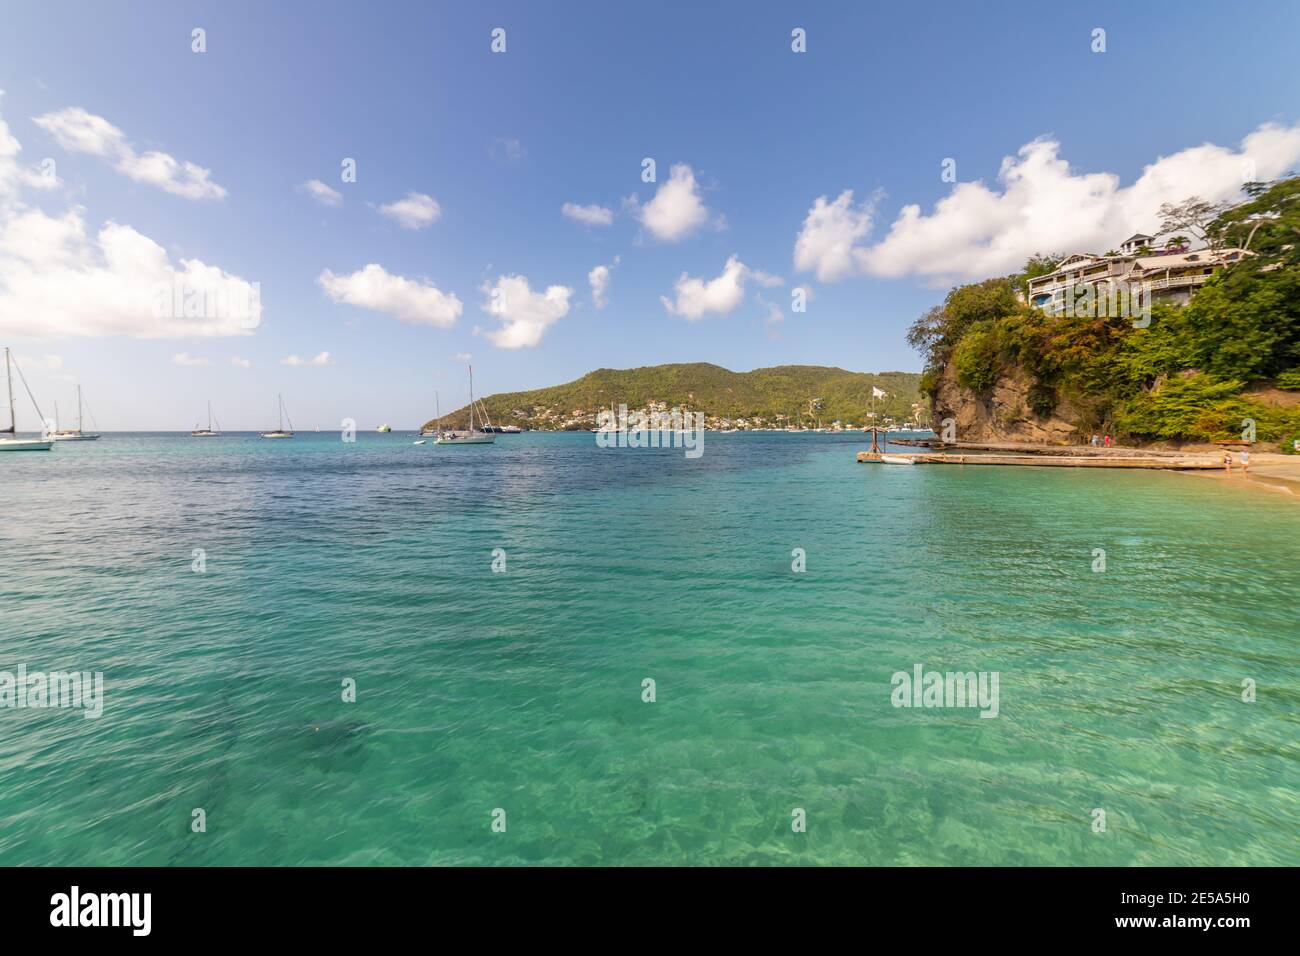 Saint Vincent and the Grenadines, Admiralty Bay, Bequia Stock Photo